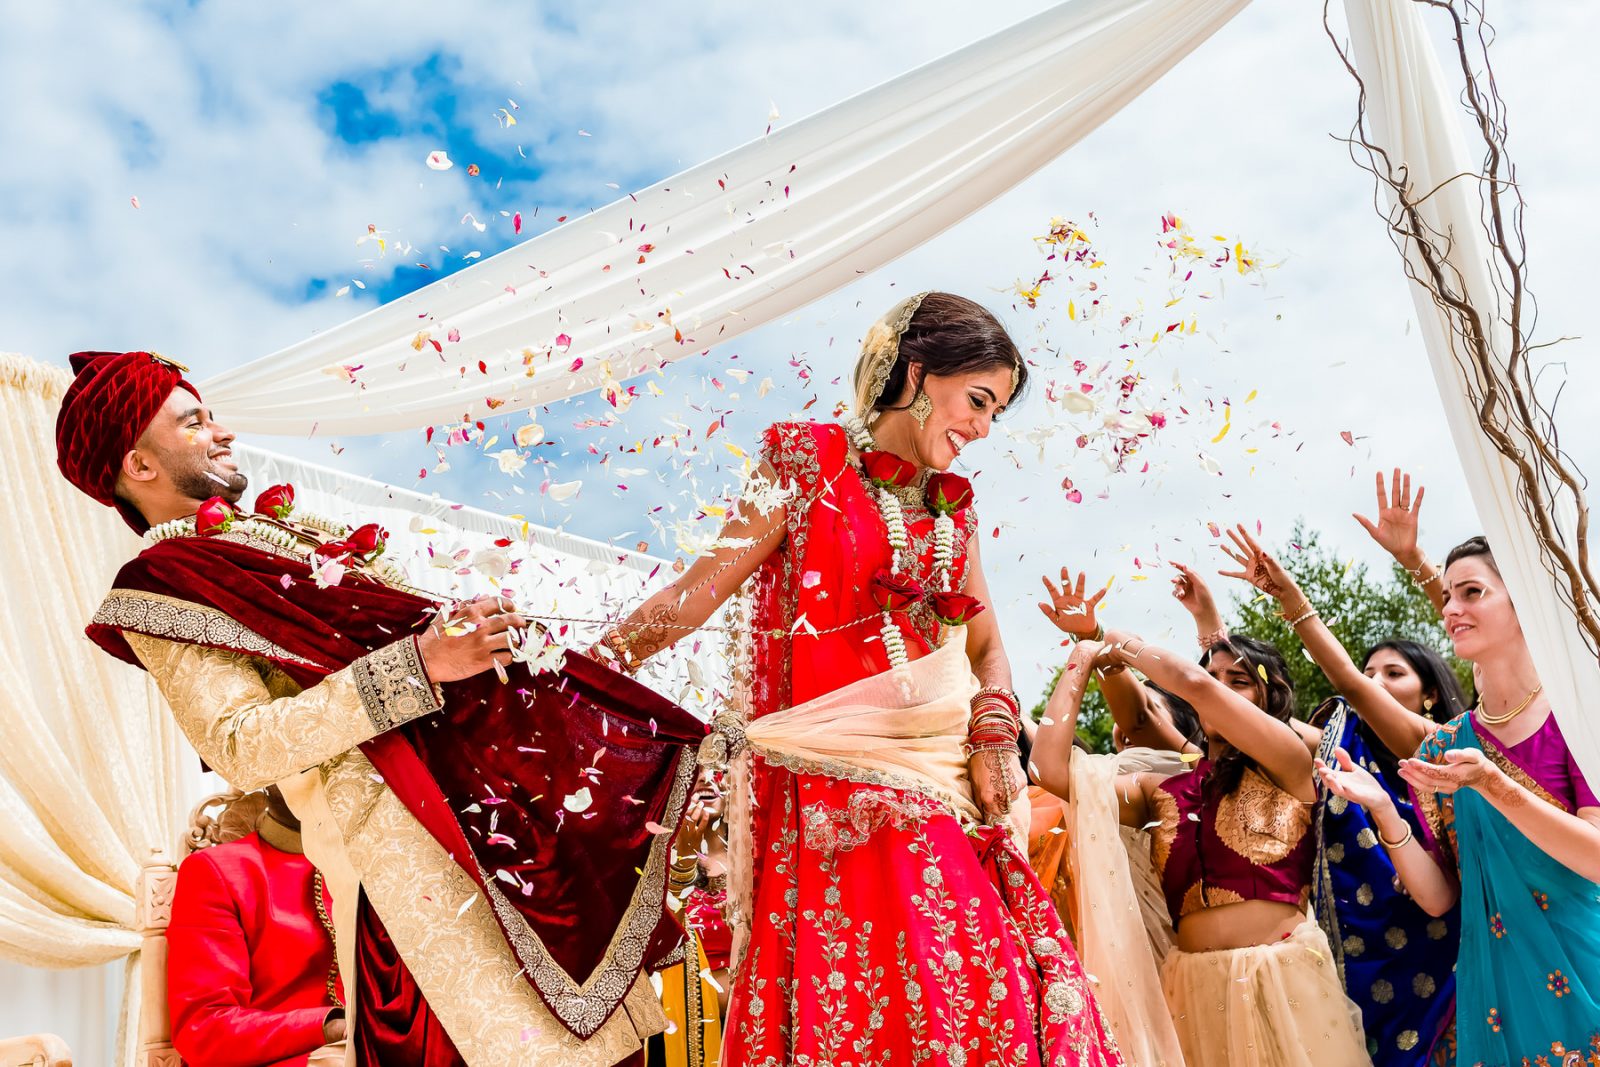 Indian Bride and Groom at wedding with confetti being thrown at them